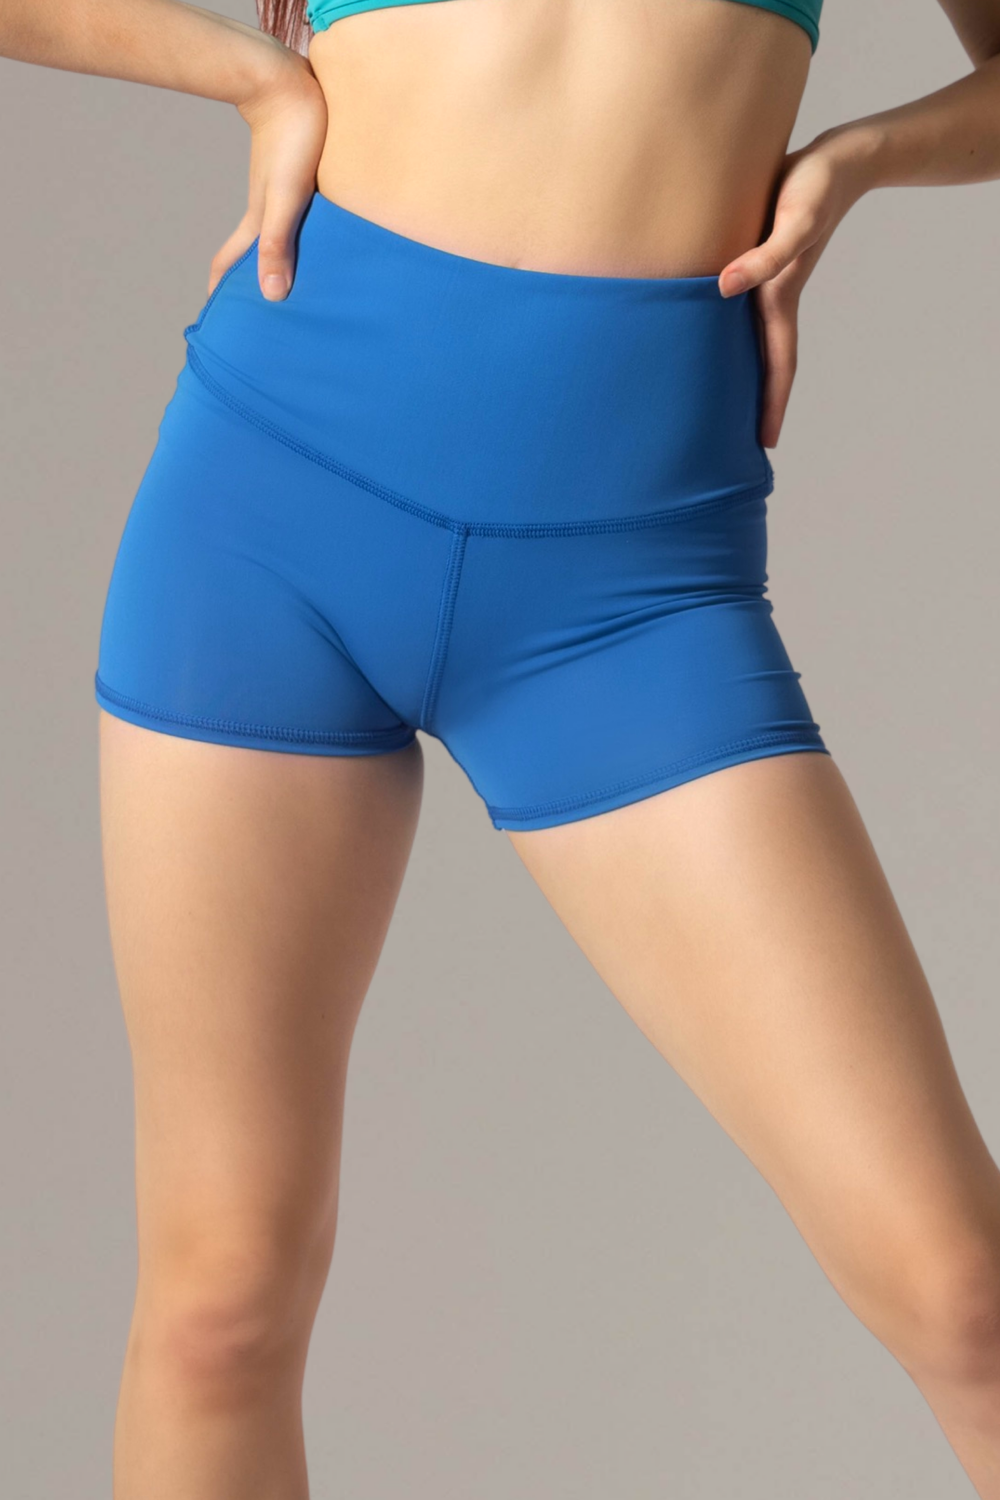 Tiger Friday Online Shop for Shorties Bootie Shorts - Blue Jay Dancewear | Size: CXS